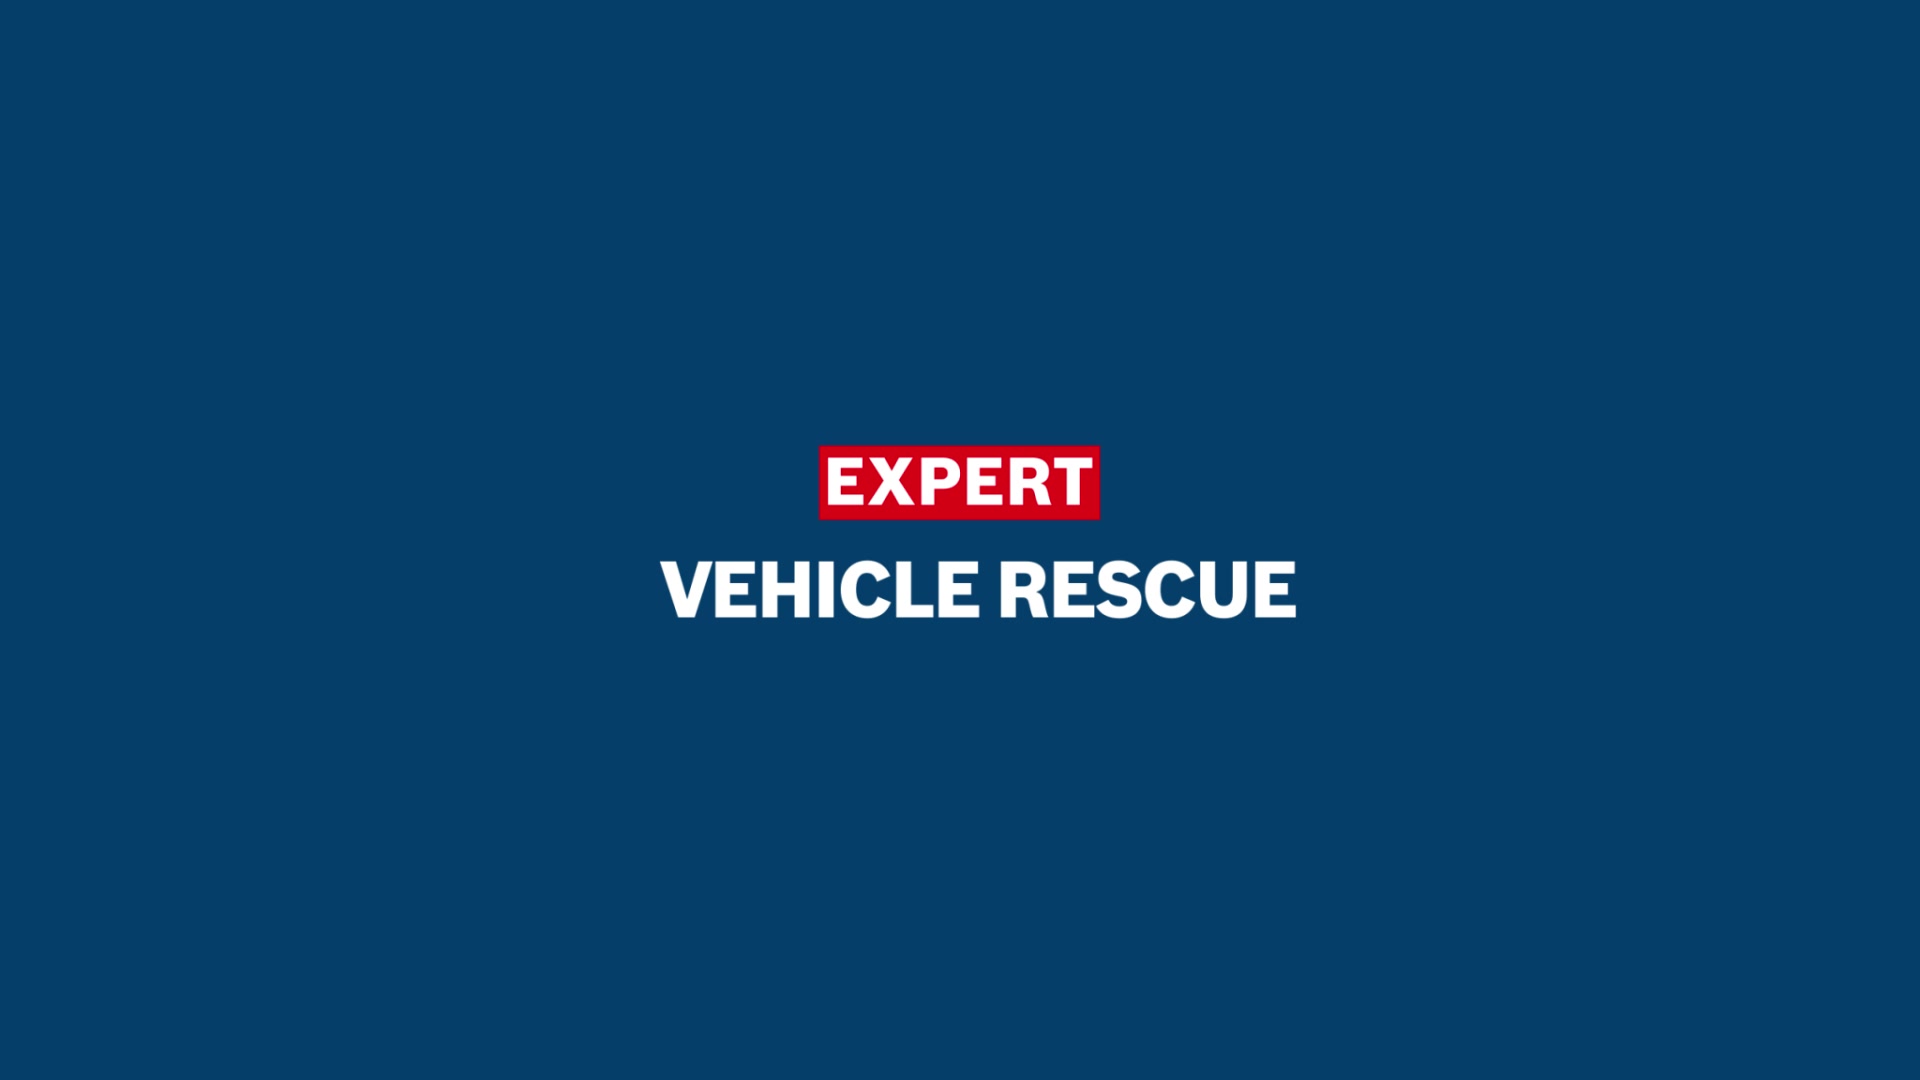 EXPERT Vehicle Rescue